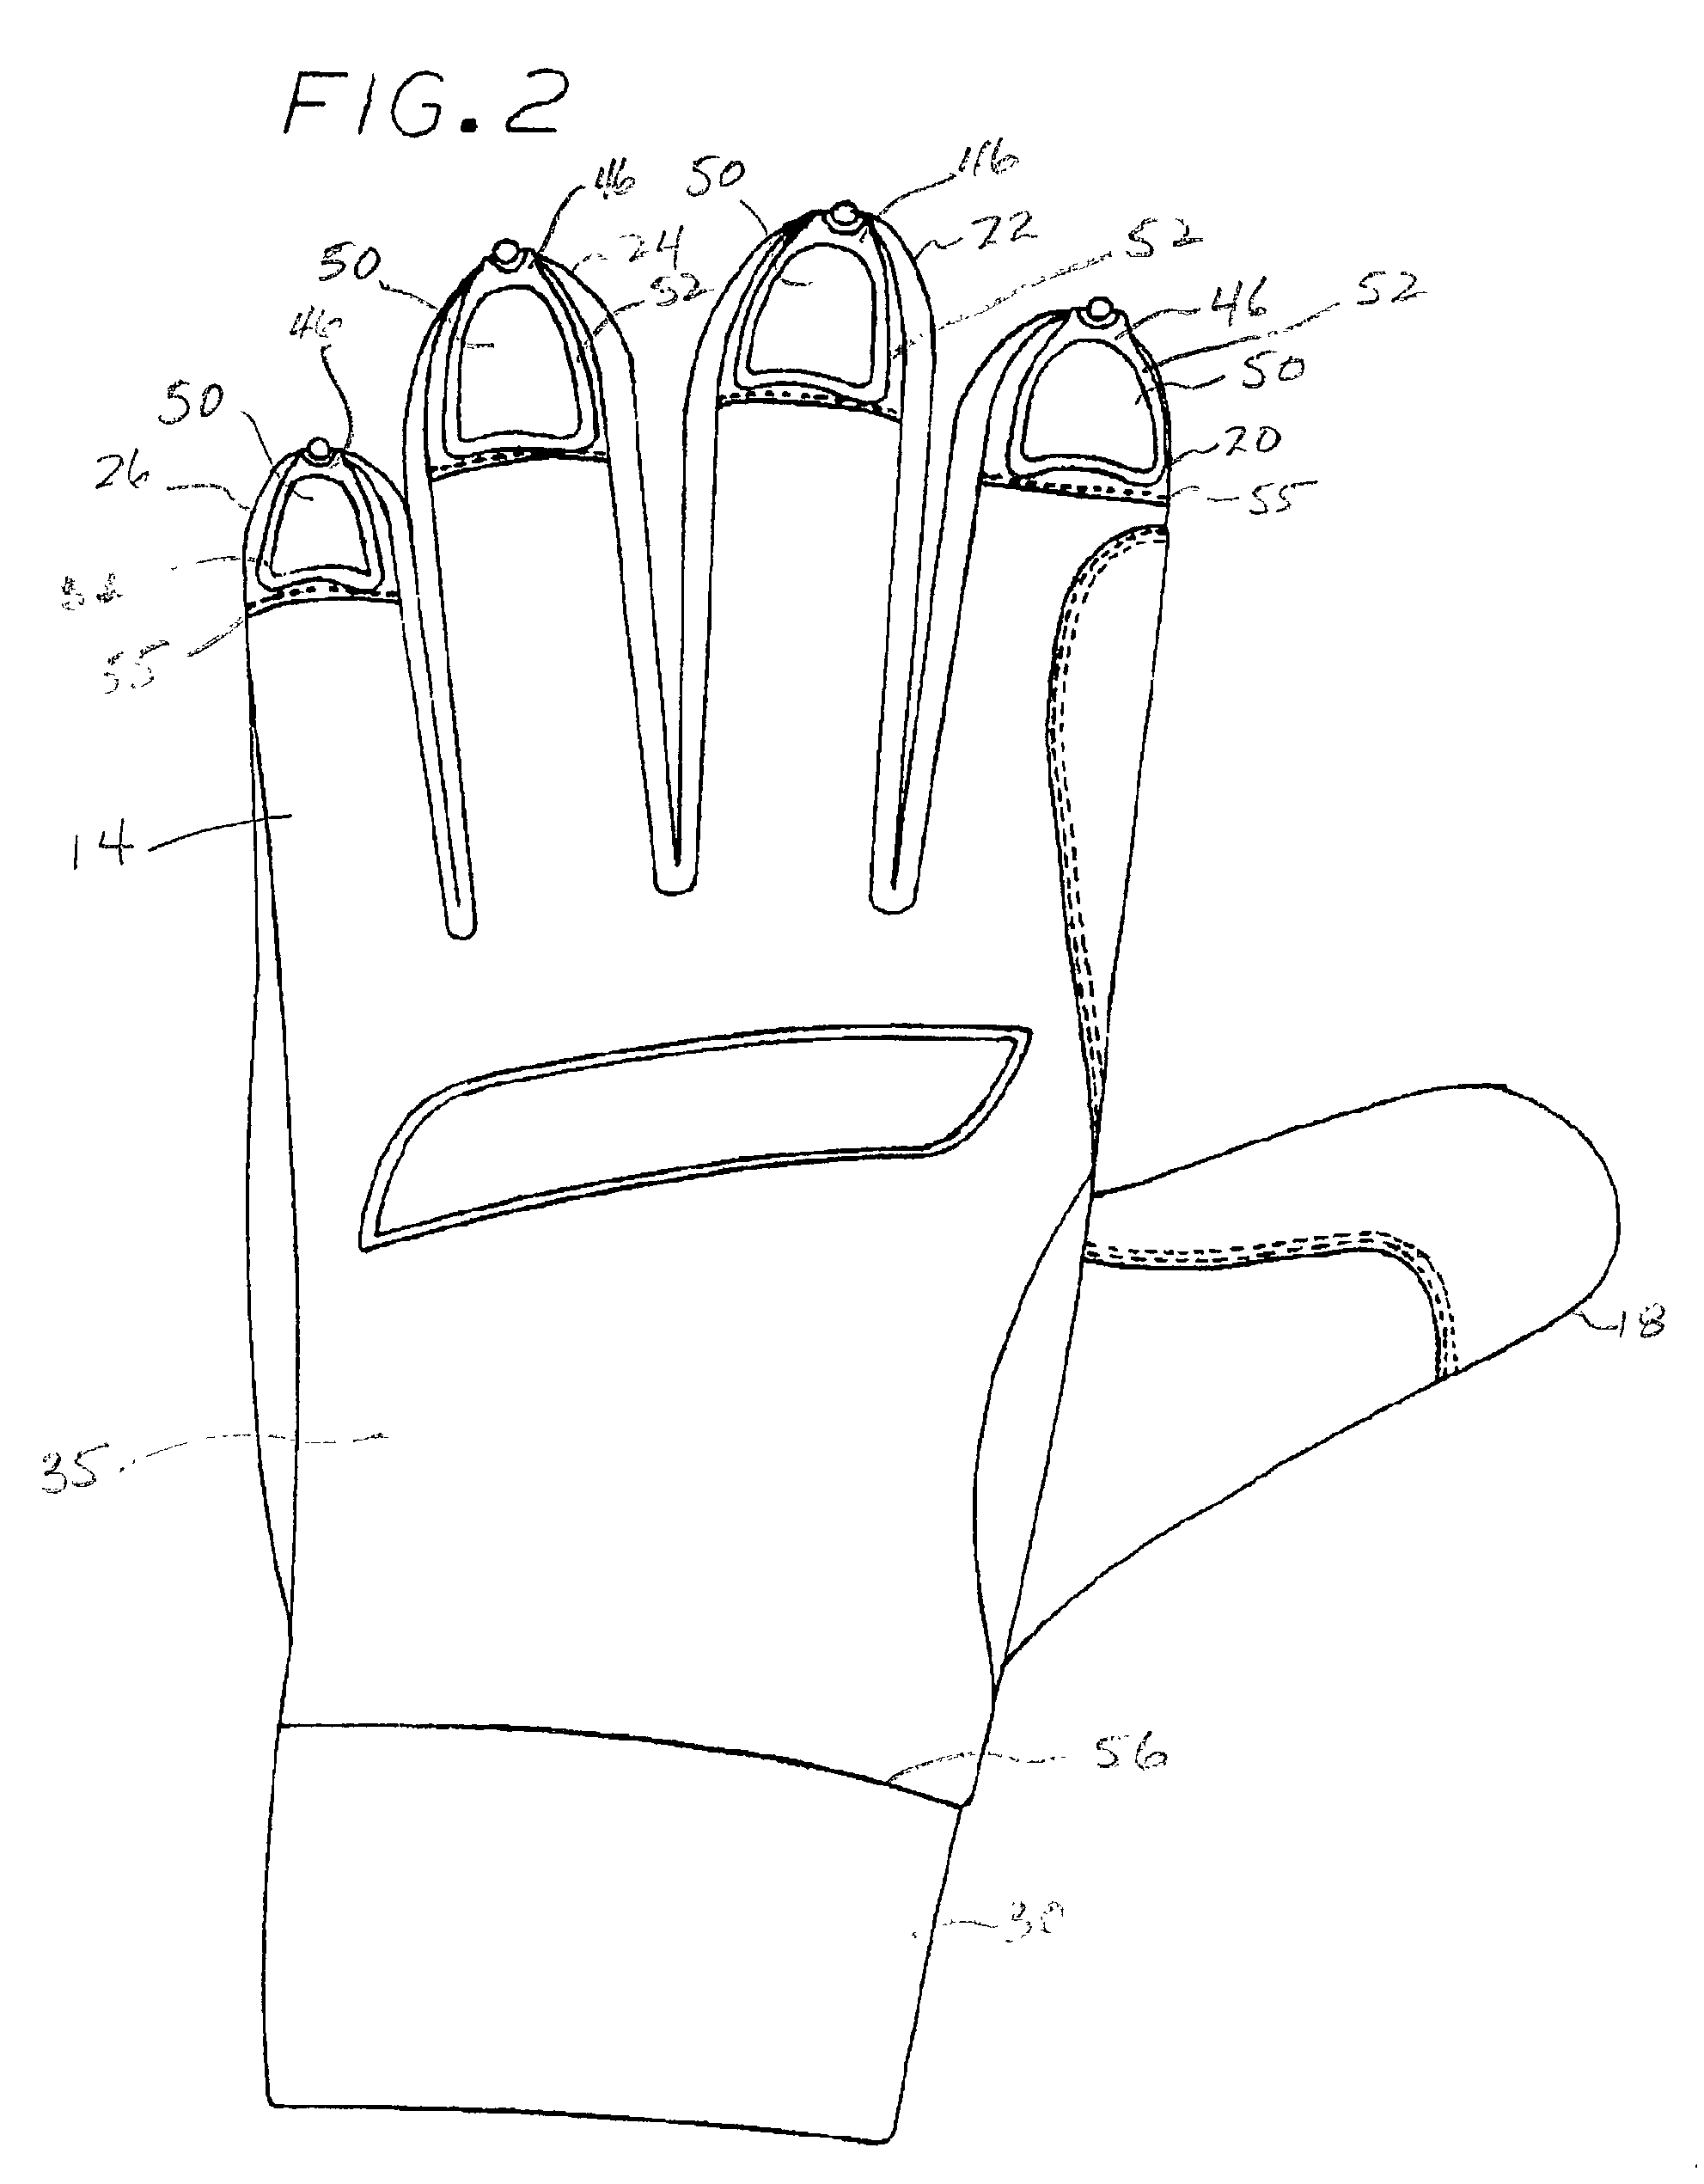 Glove having molded rubber palm pattern with a portion that rolls over fingertips